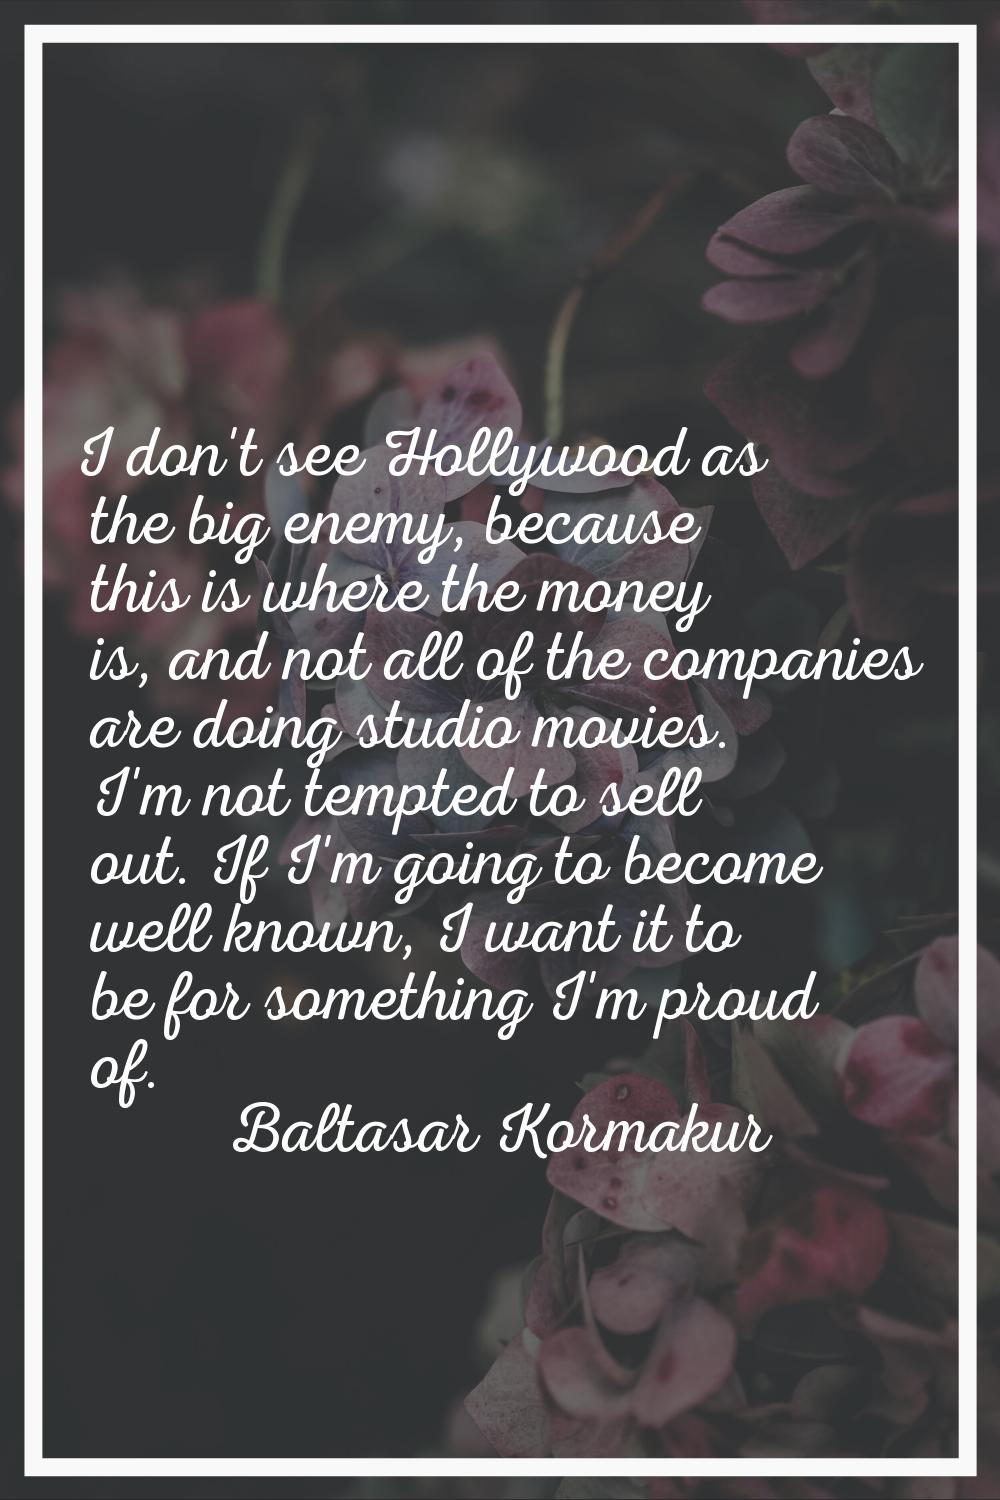 I don't see Hollywood as the big enemy, because this is where the money is, and not all of the comp